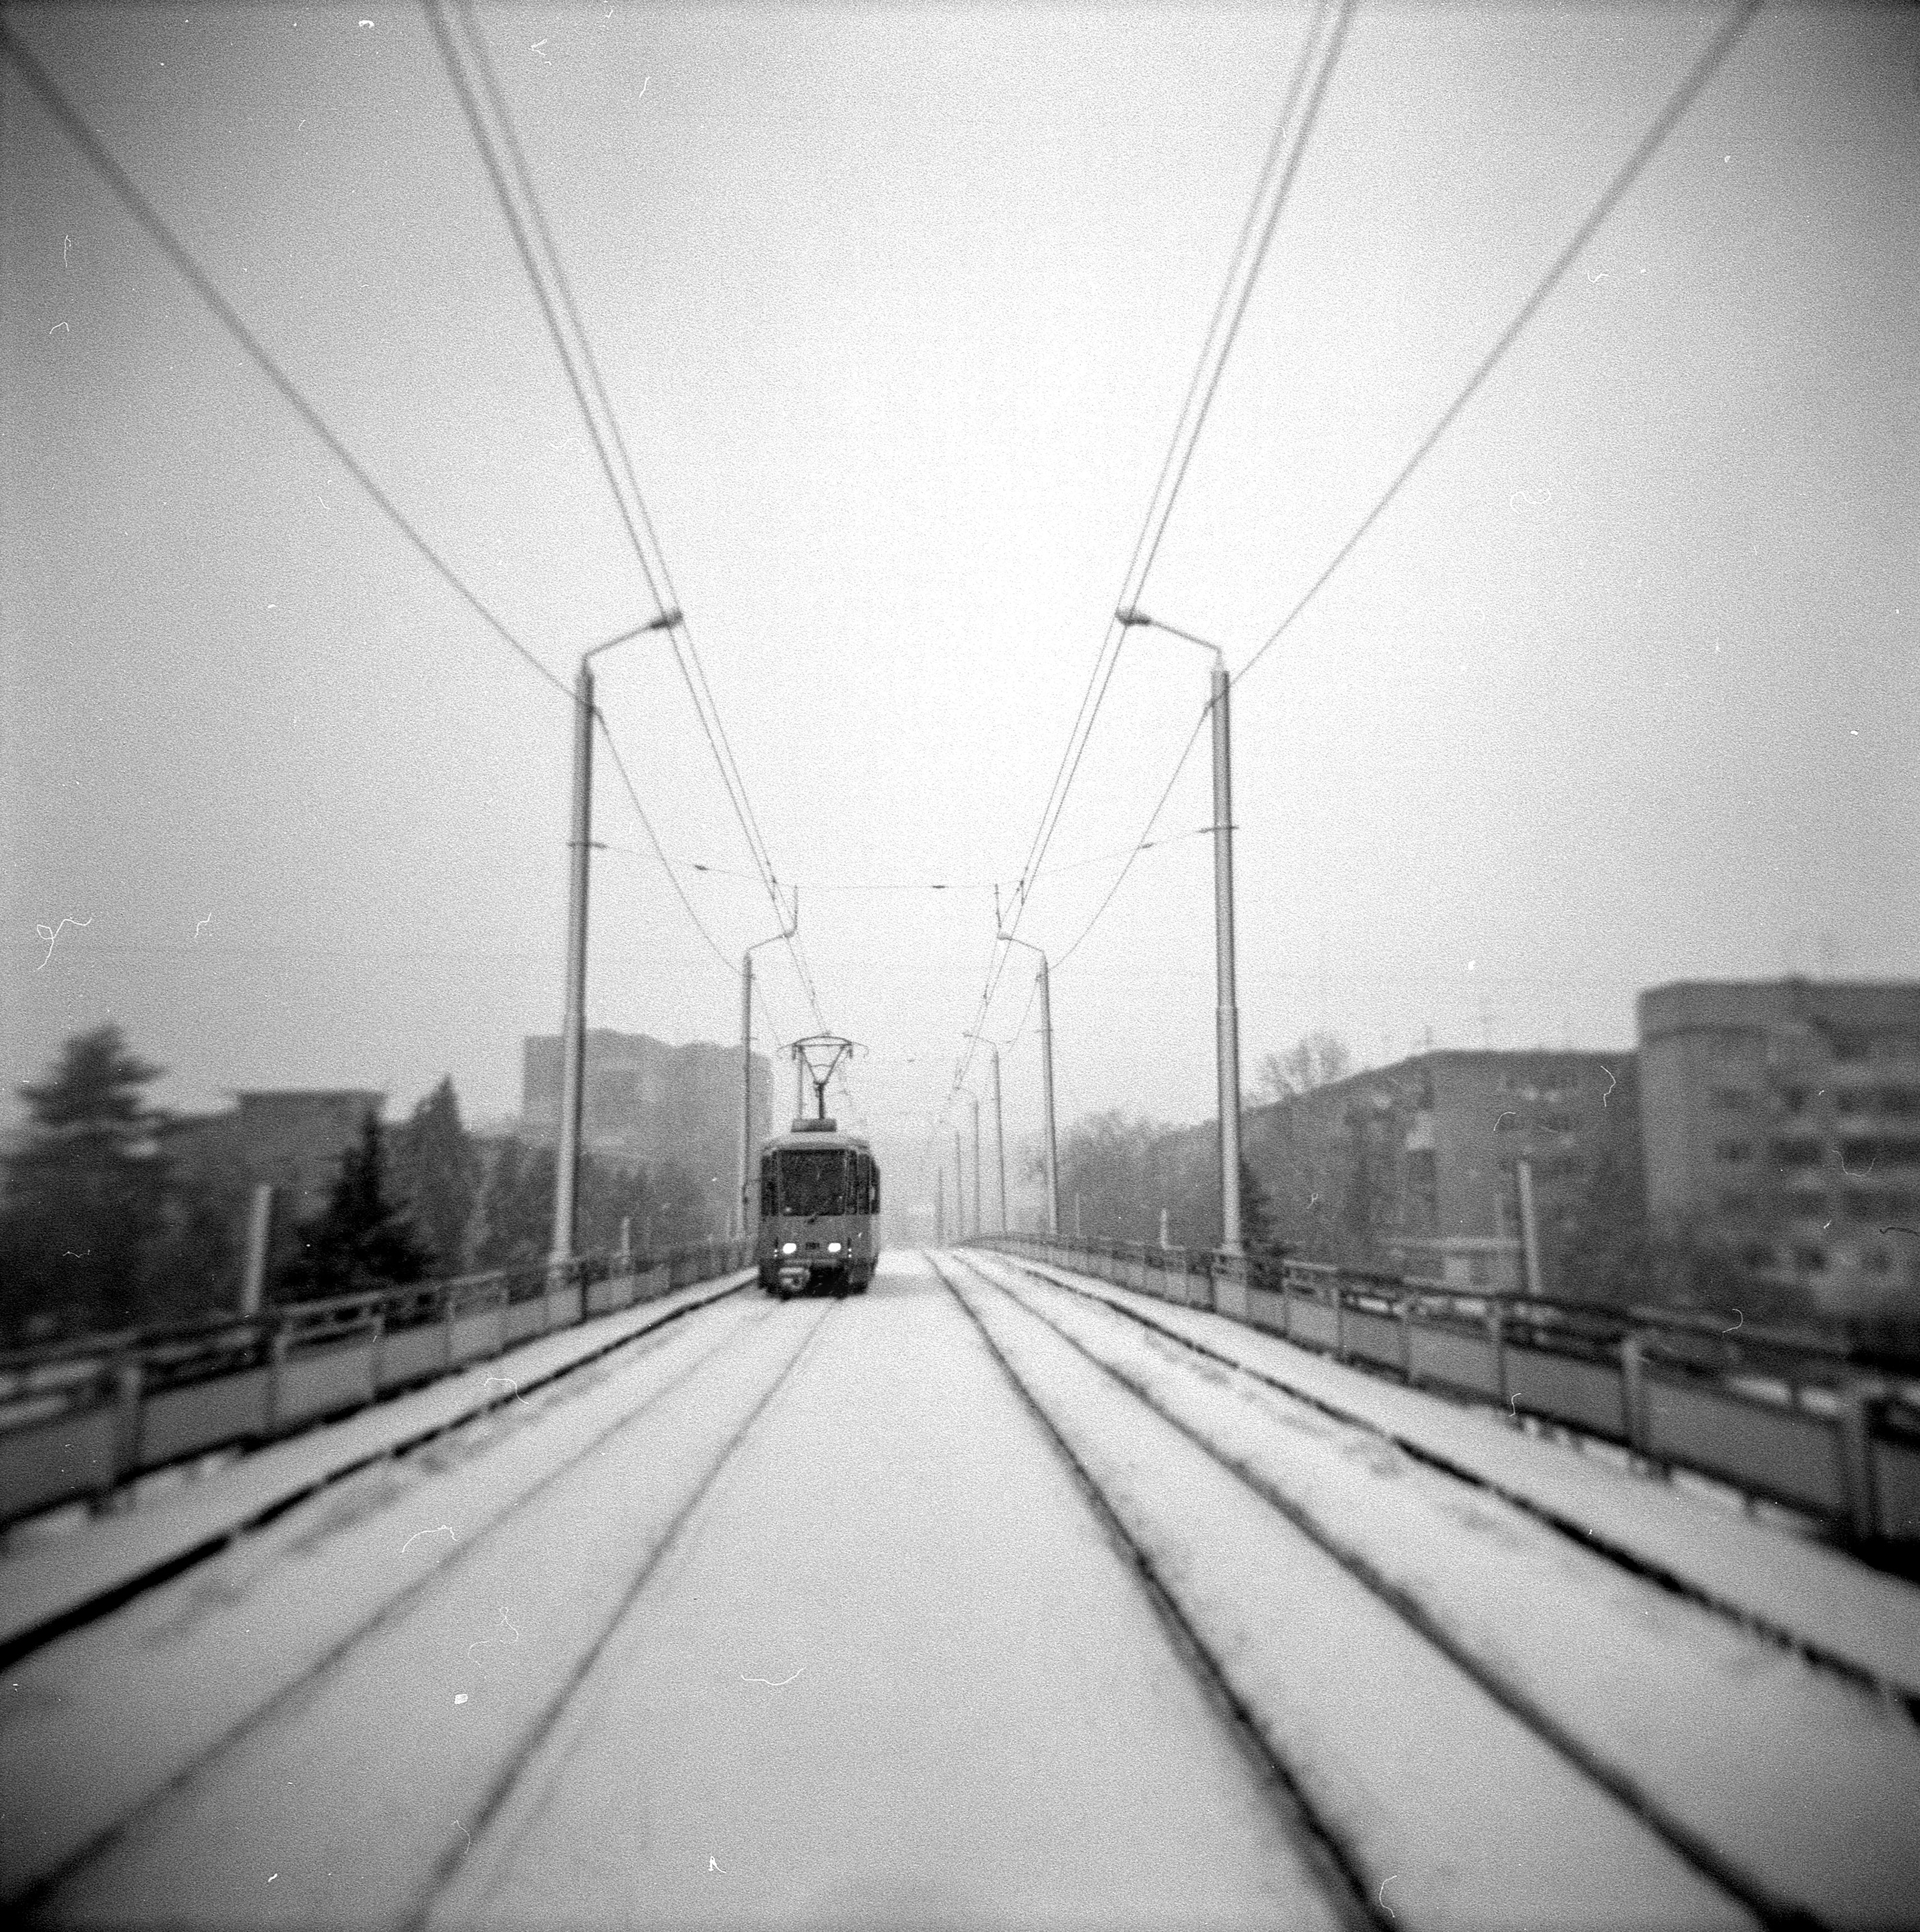 The image is a black and white photo of a tram on a bridge. The tram is in the middle of the bridge and moves toward the observer. The tracks and bridge are covered with snow.
In the background, houses are visible in the fog.
The lines of the tracks below and the electrical wires above form the perspective 